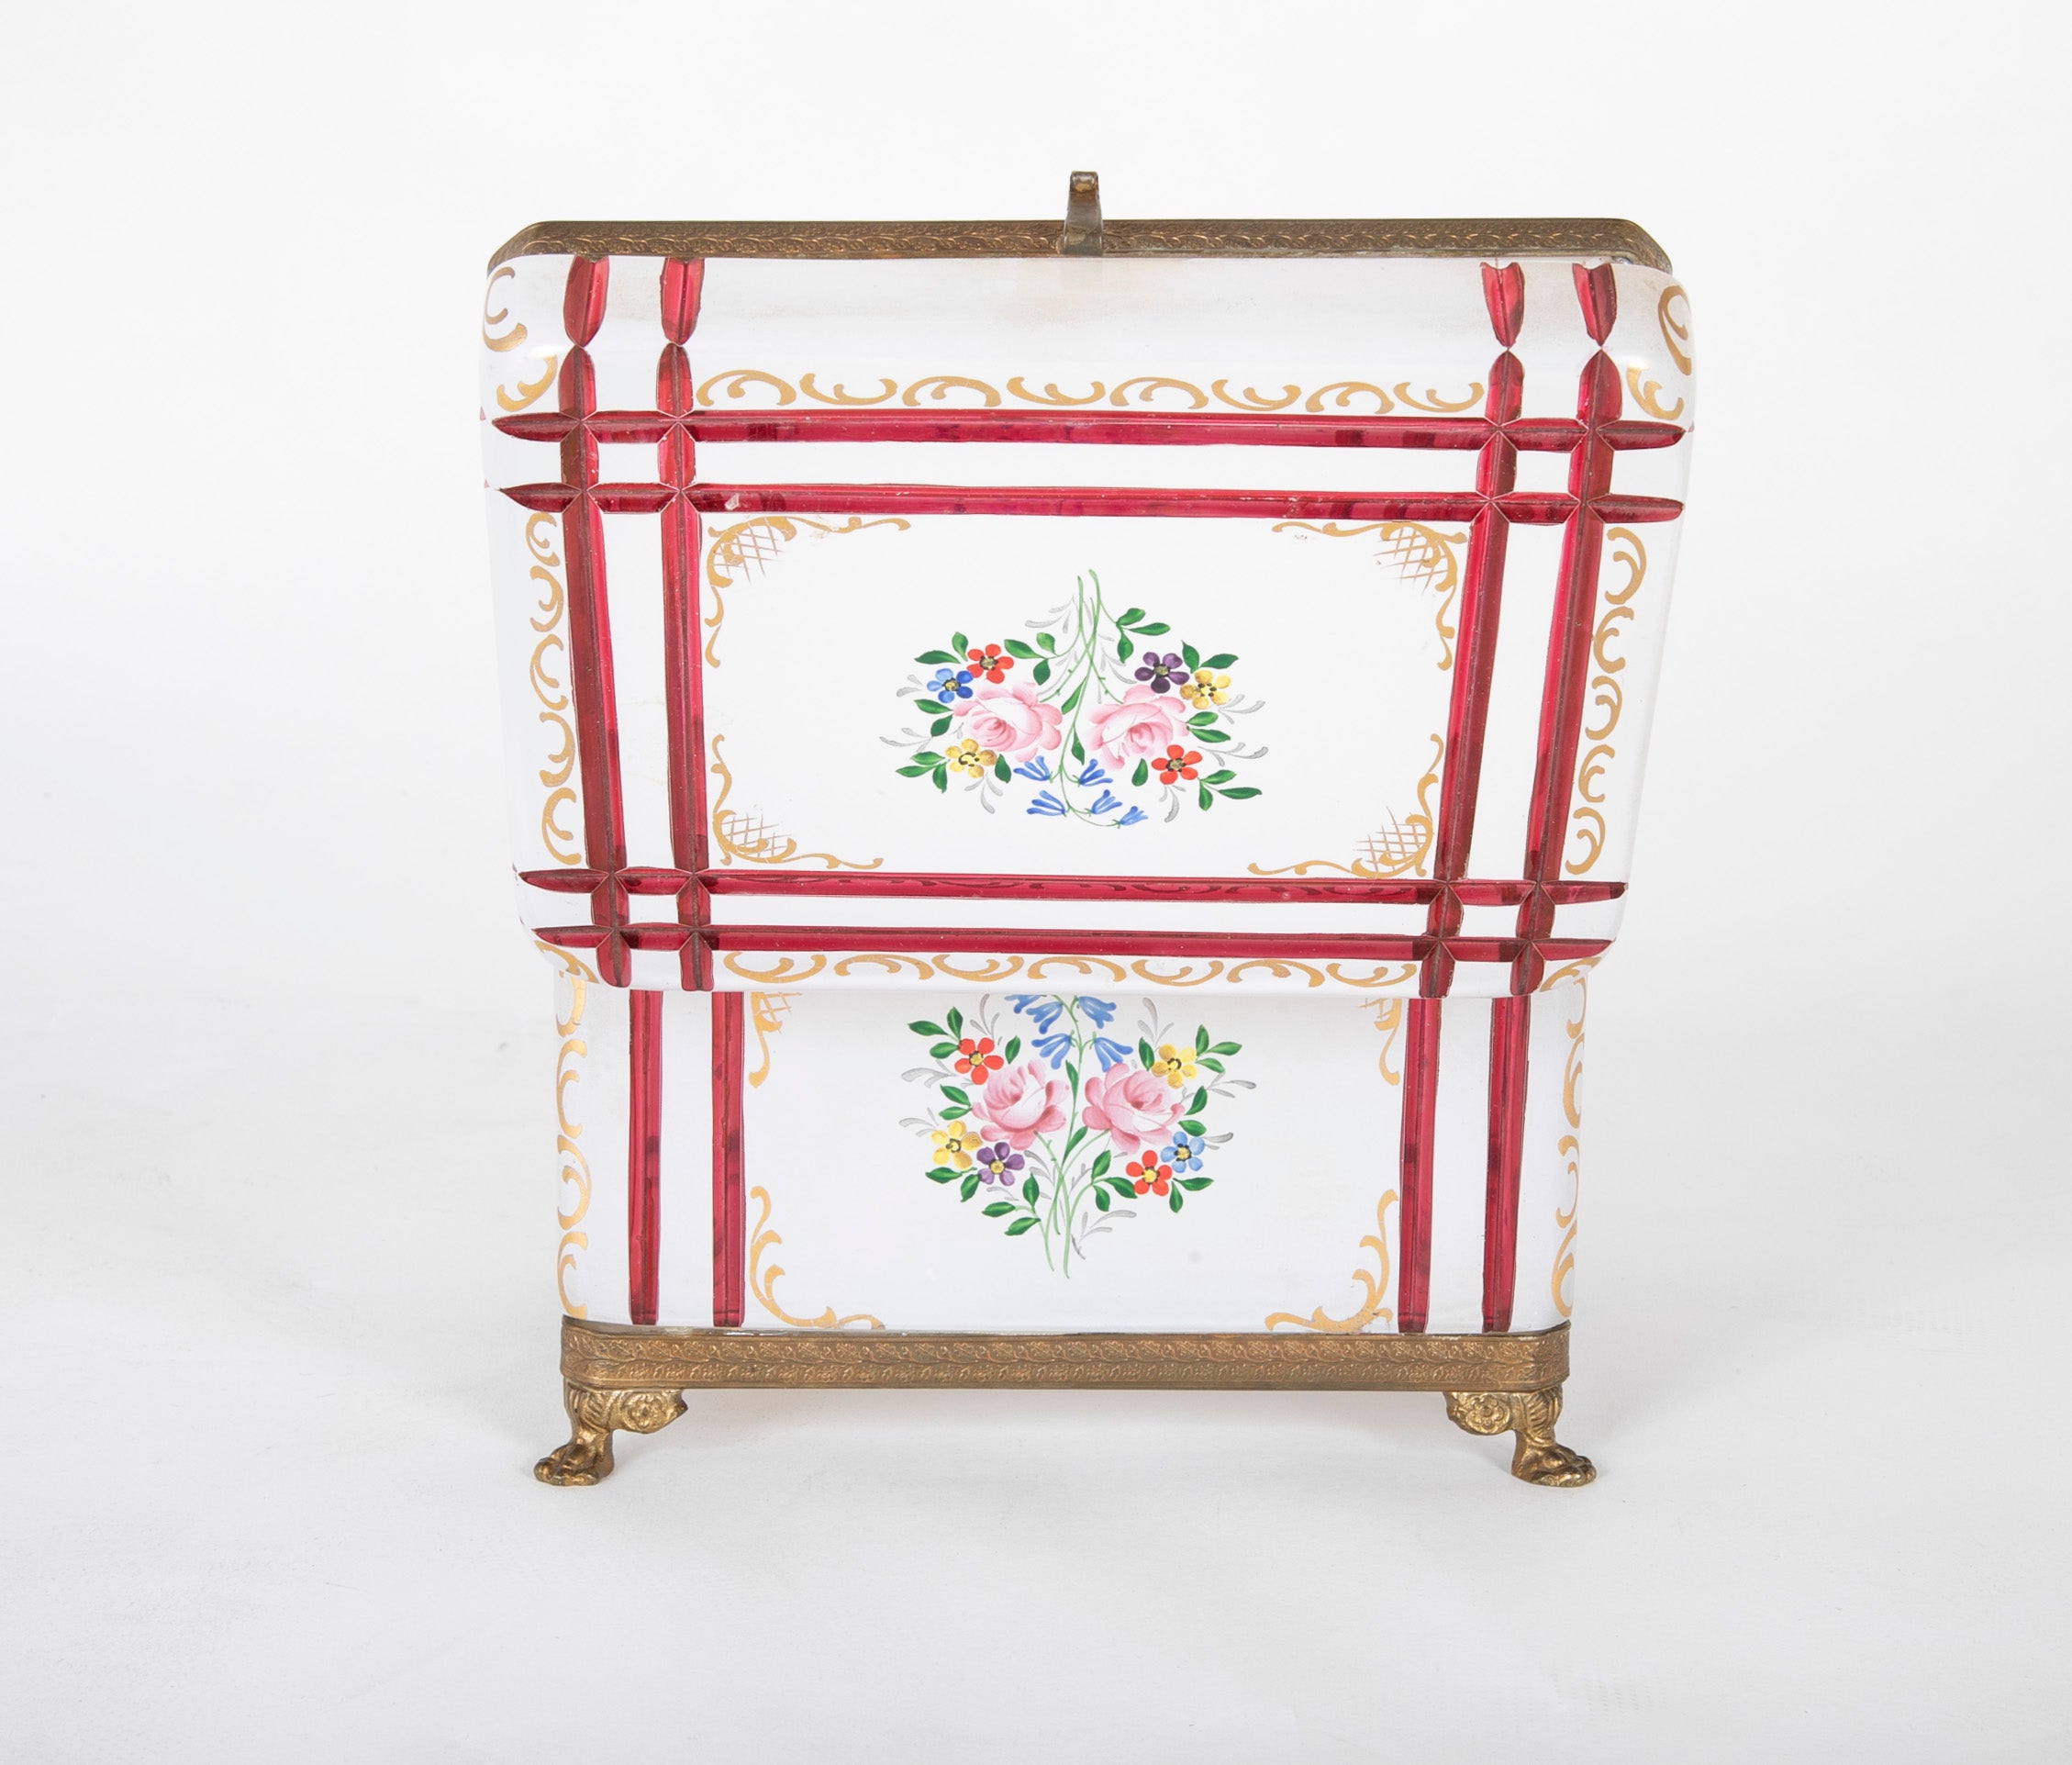 A Unique 19th Century White Opaline Glass Box with Red Cuts